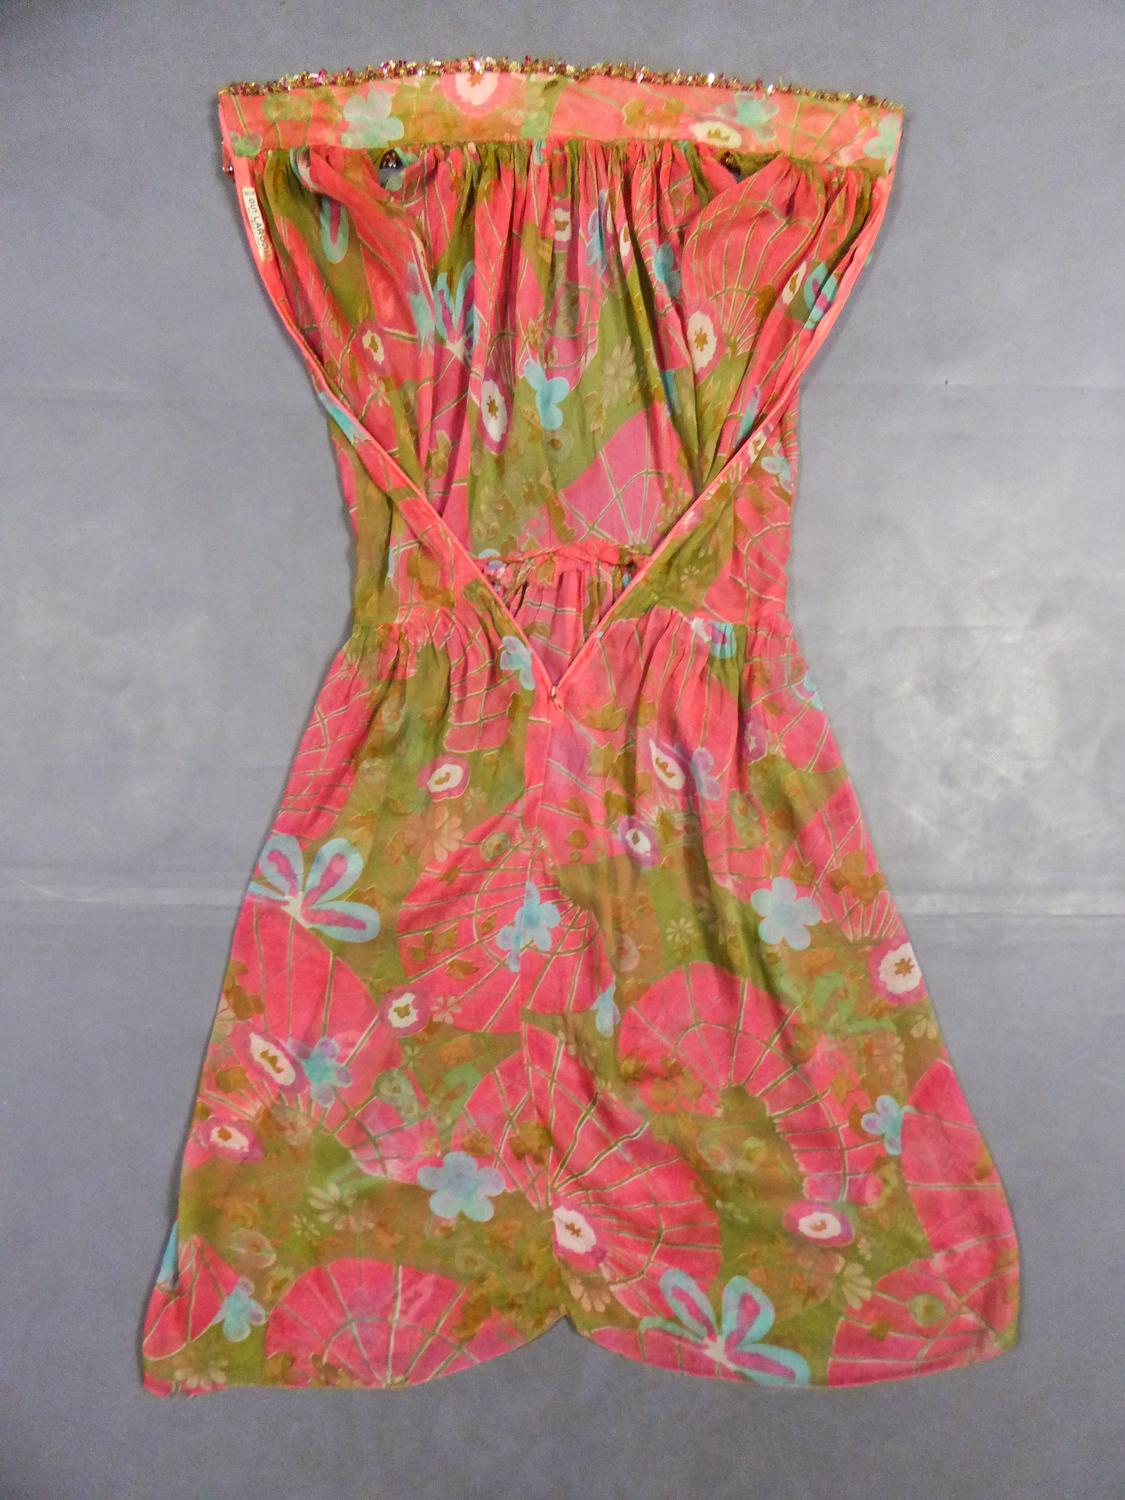 Circa 1965/1970
France

Beautiful evening set made by Guy Laroche in printed silk crepe dating from the years 1965/1970. Sleeveless dress with high mandarin collar and zip in the back, densely embroidered with sequins, pearls and iridescent